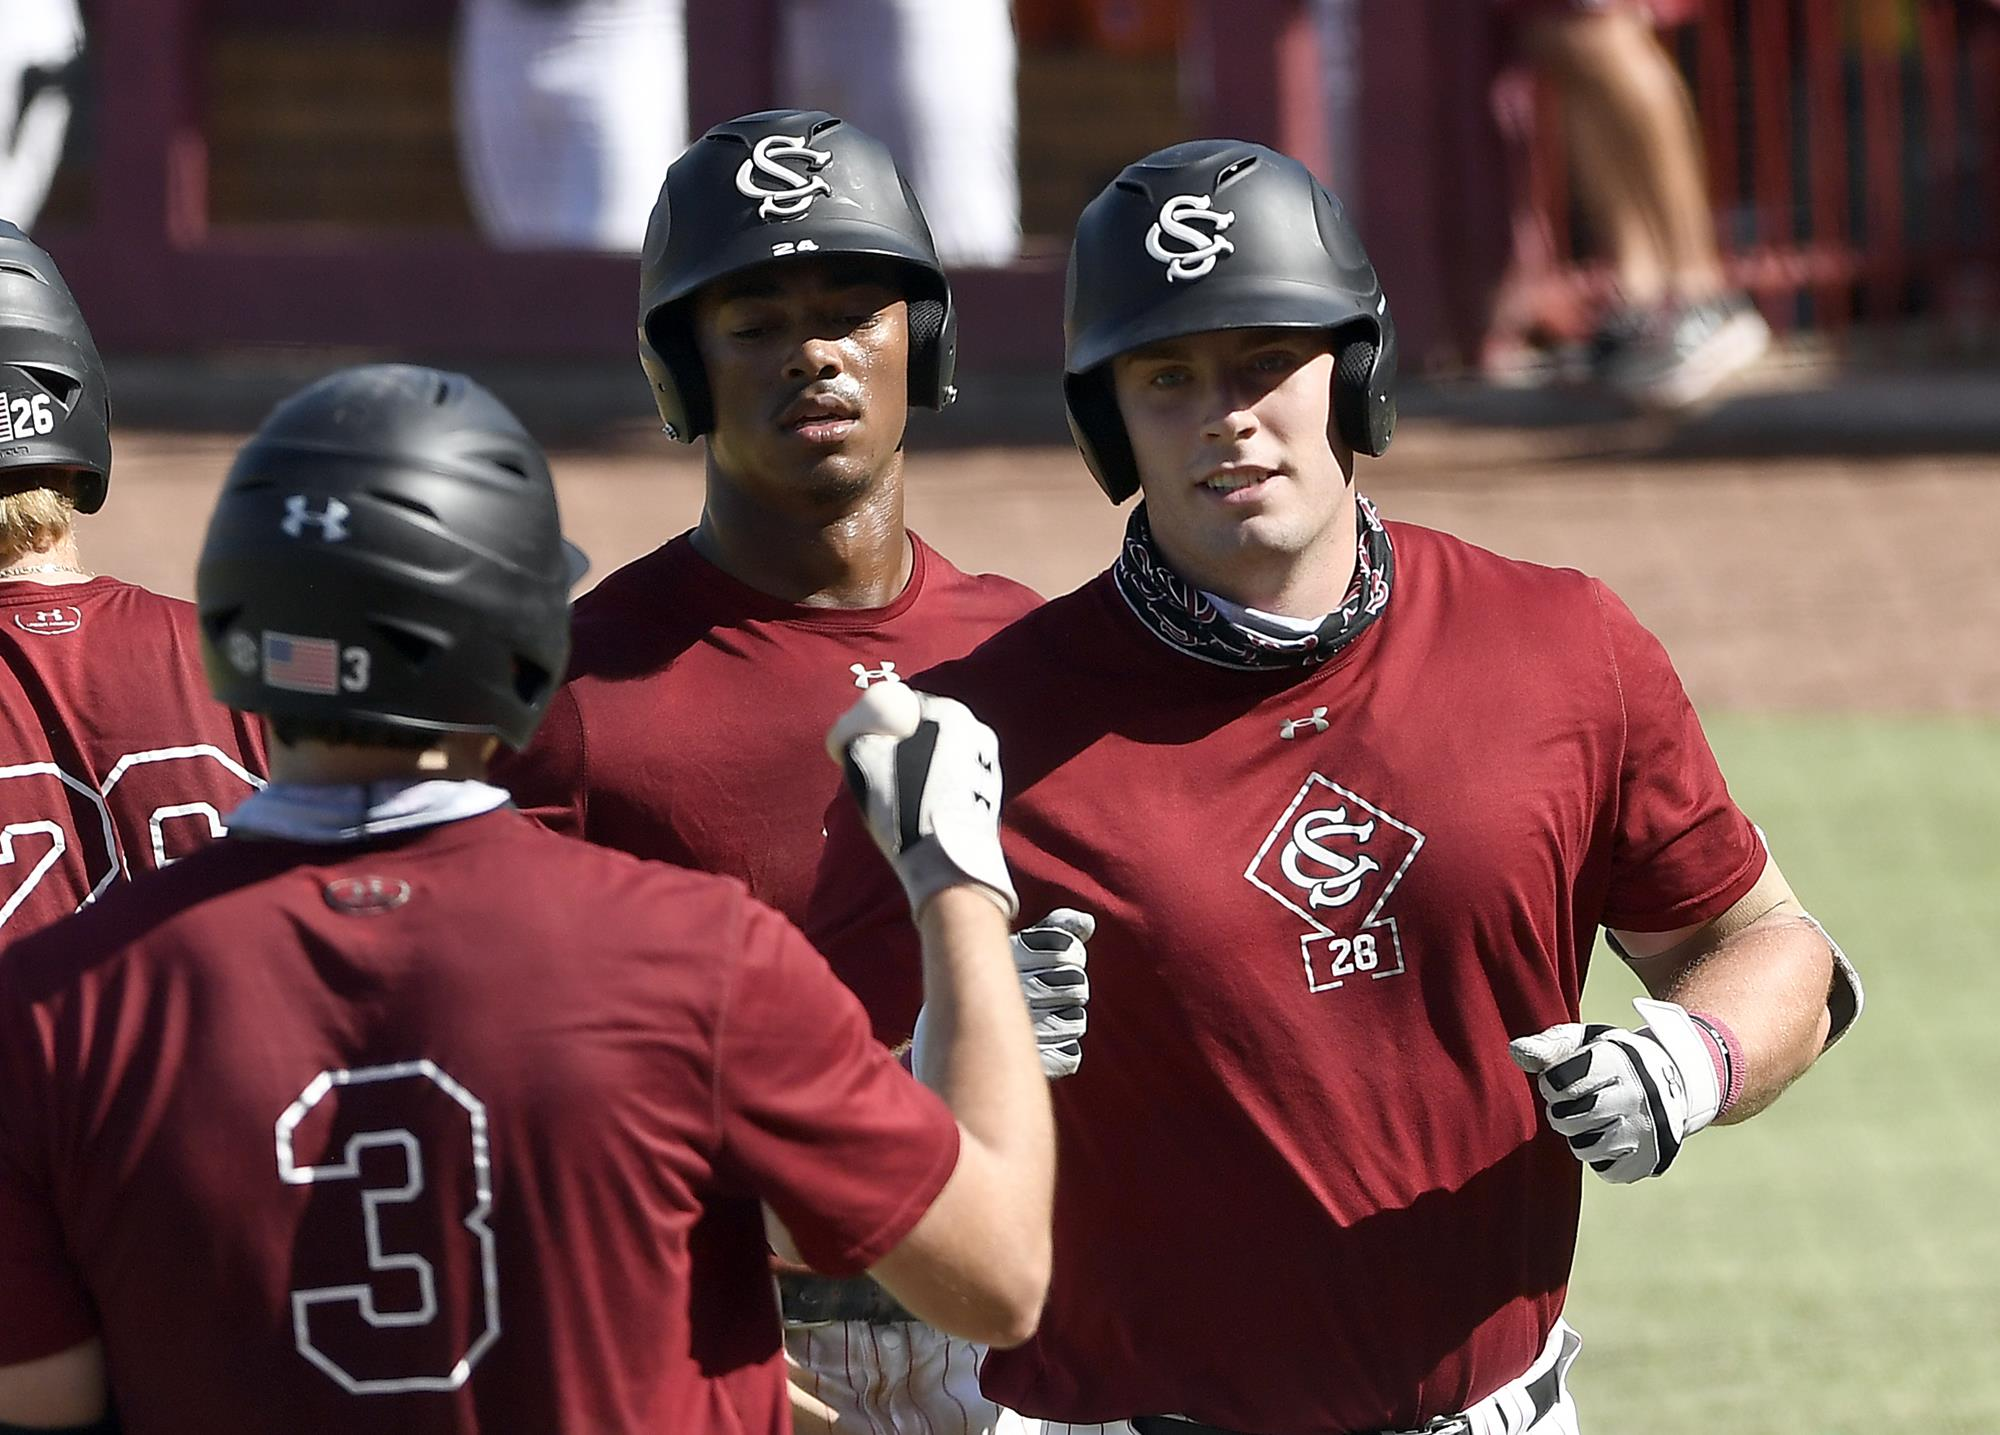 Baseball Closes Out Fall Practice with Garnet and Black World Series